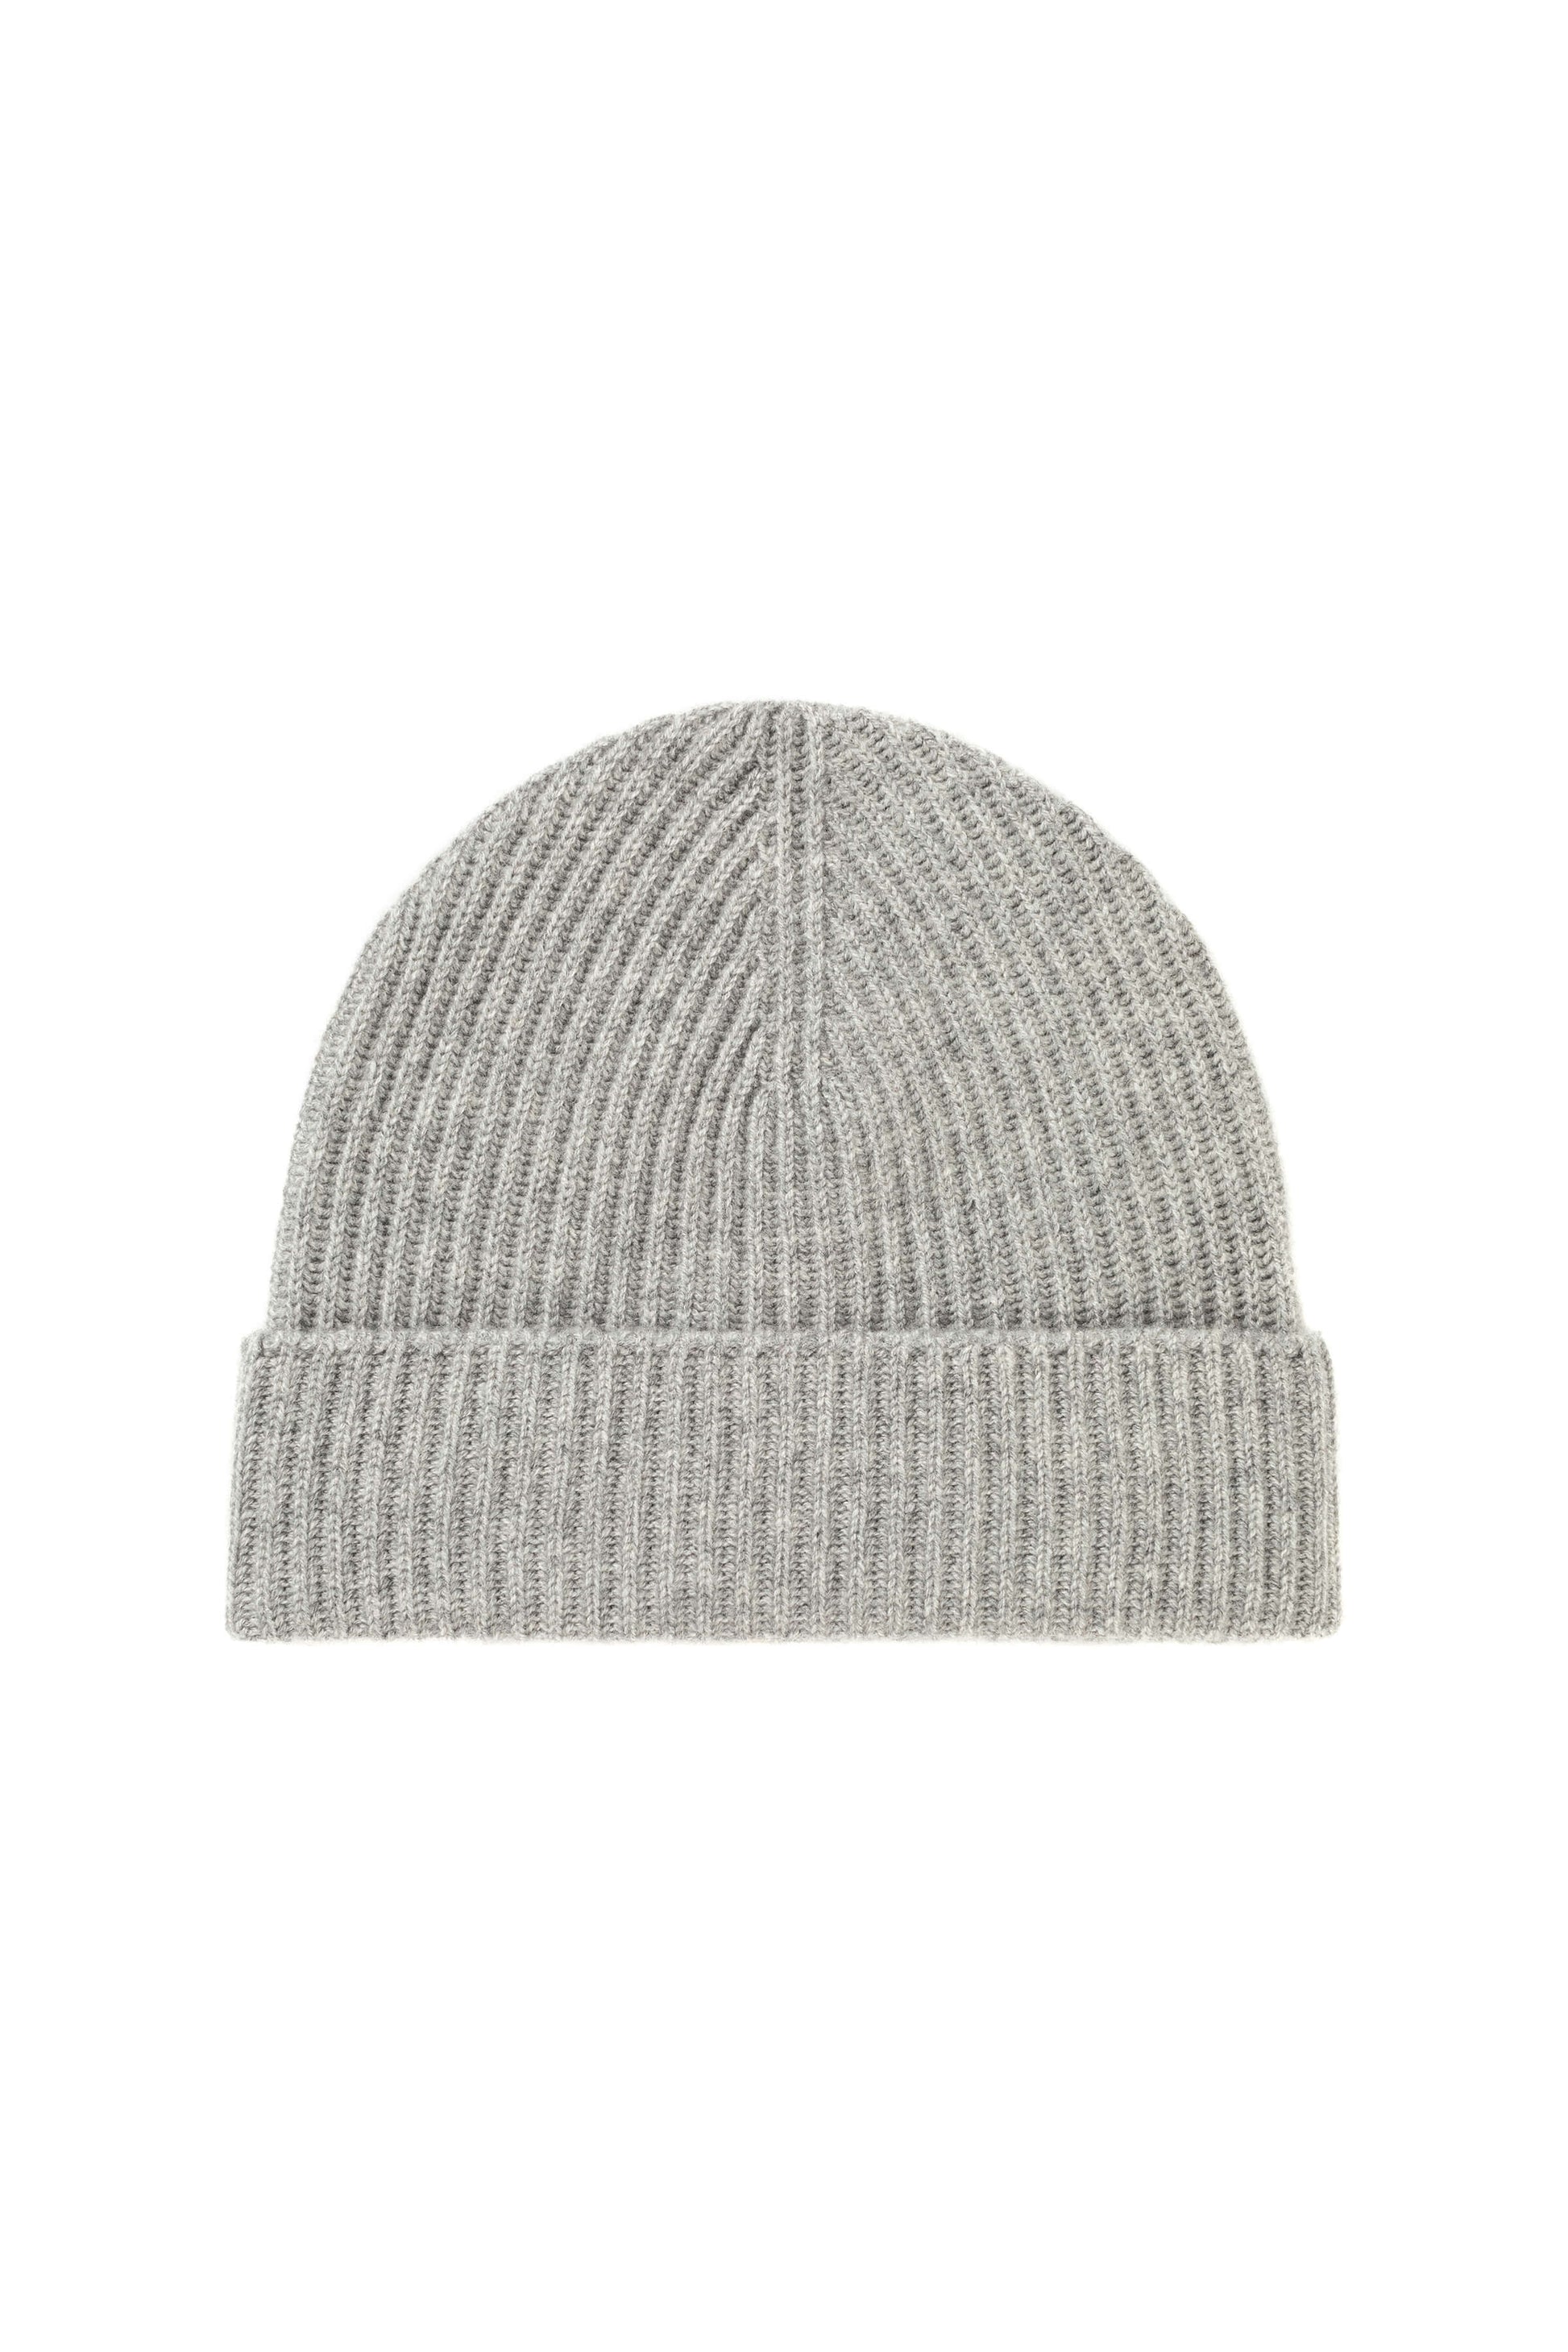 Johnstons of Elgin AW24 Knitted Accessory Light Grey Light Grey Ribbed Cashmere Beanie HAA03320HA0308ONE